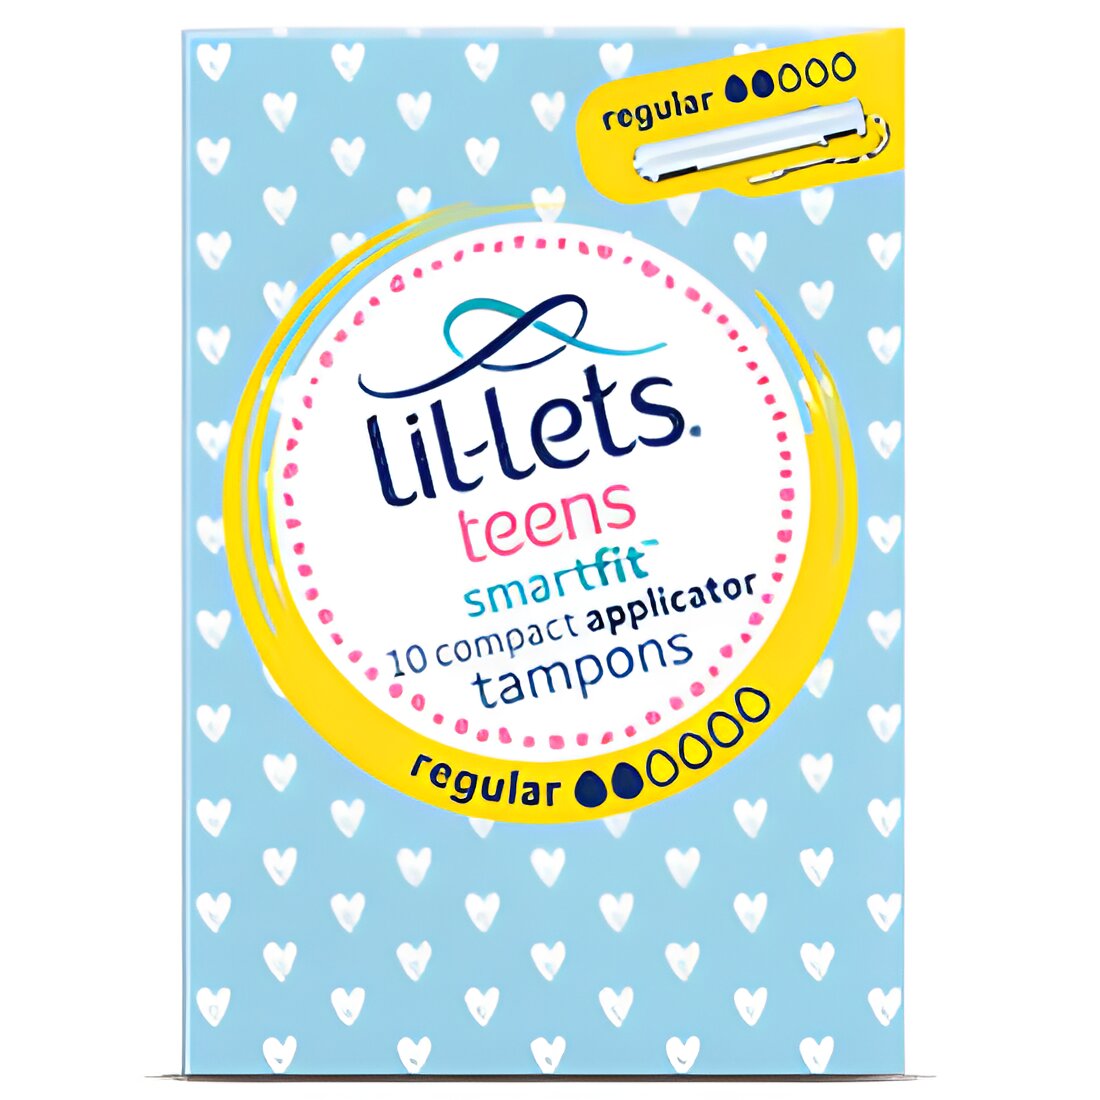 Free Period Kit Samples For Teens